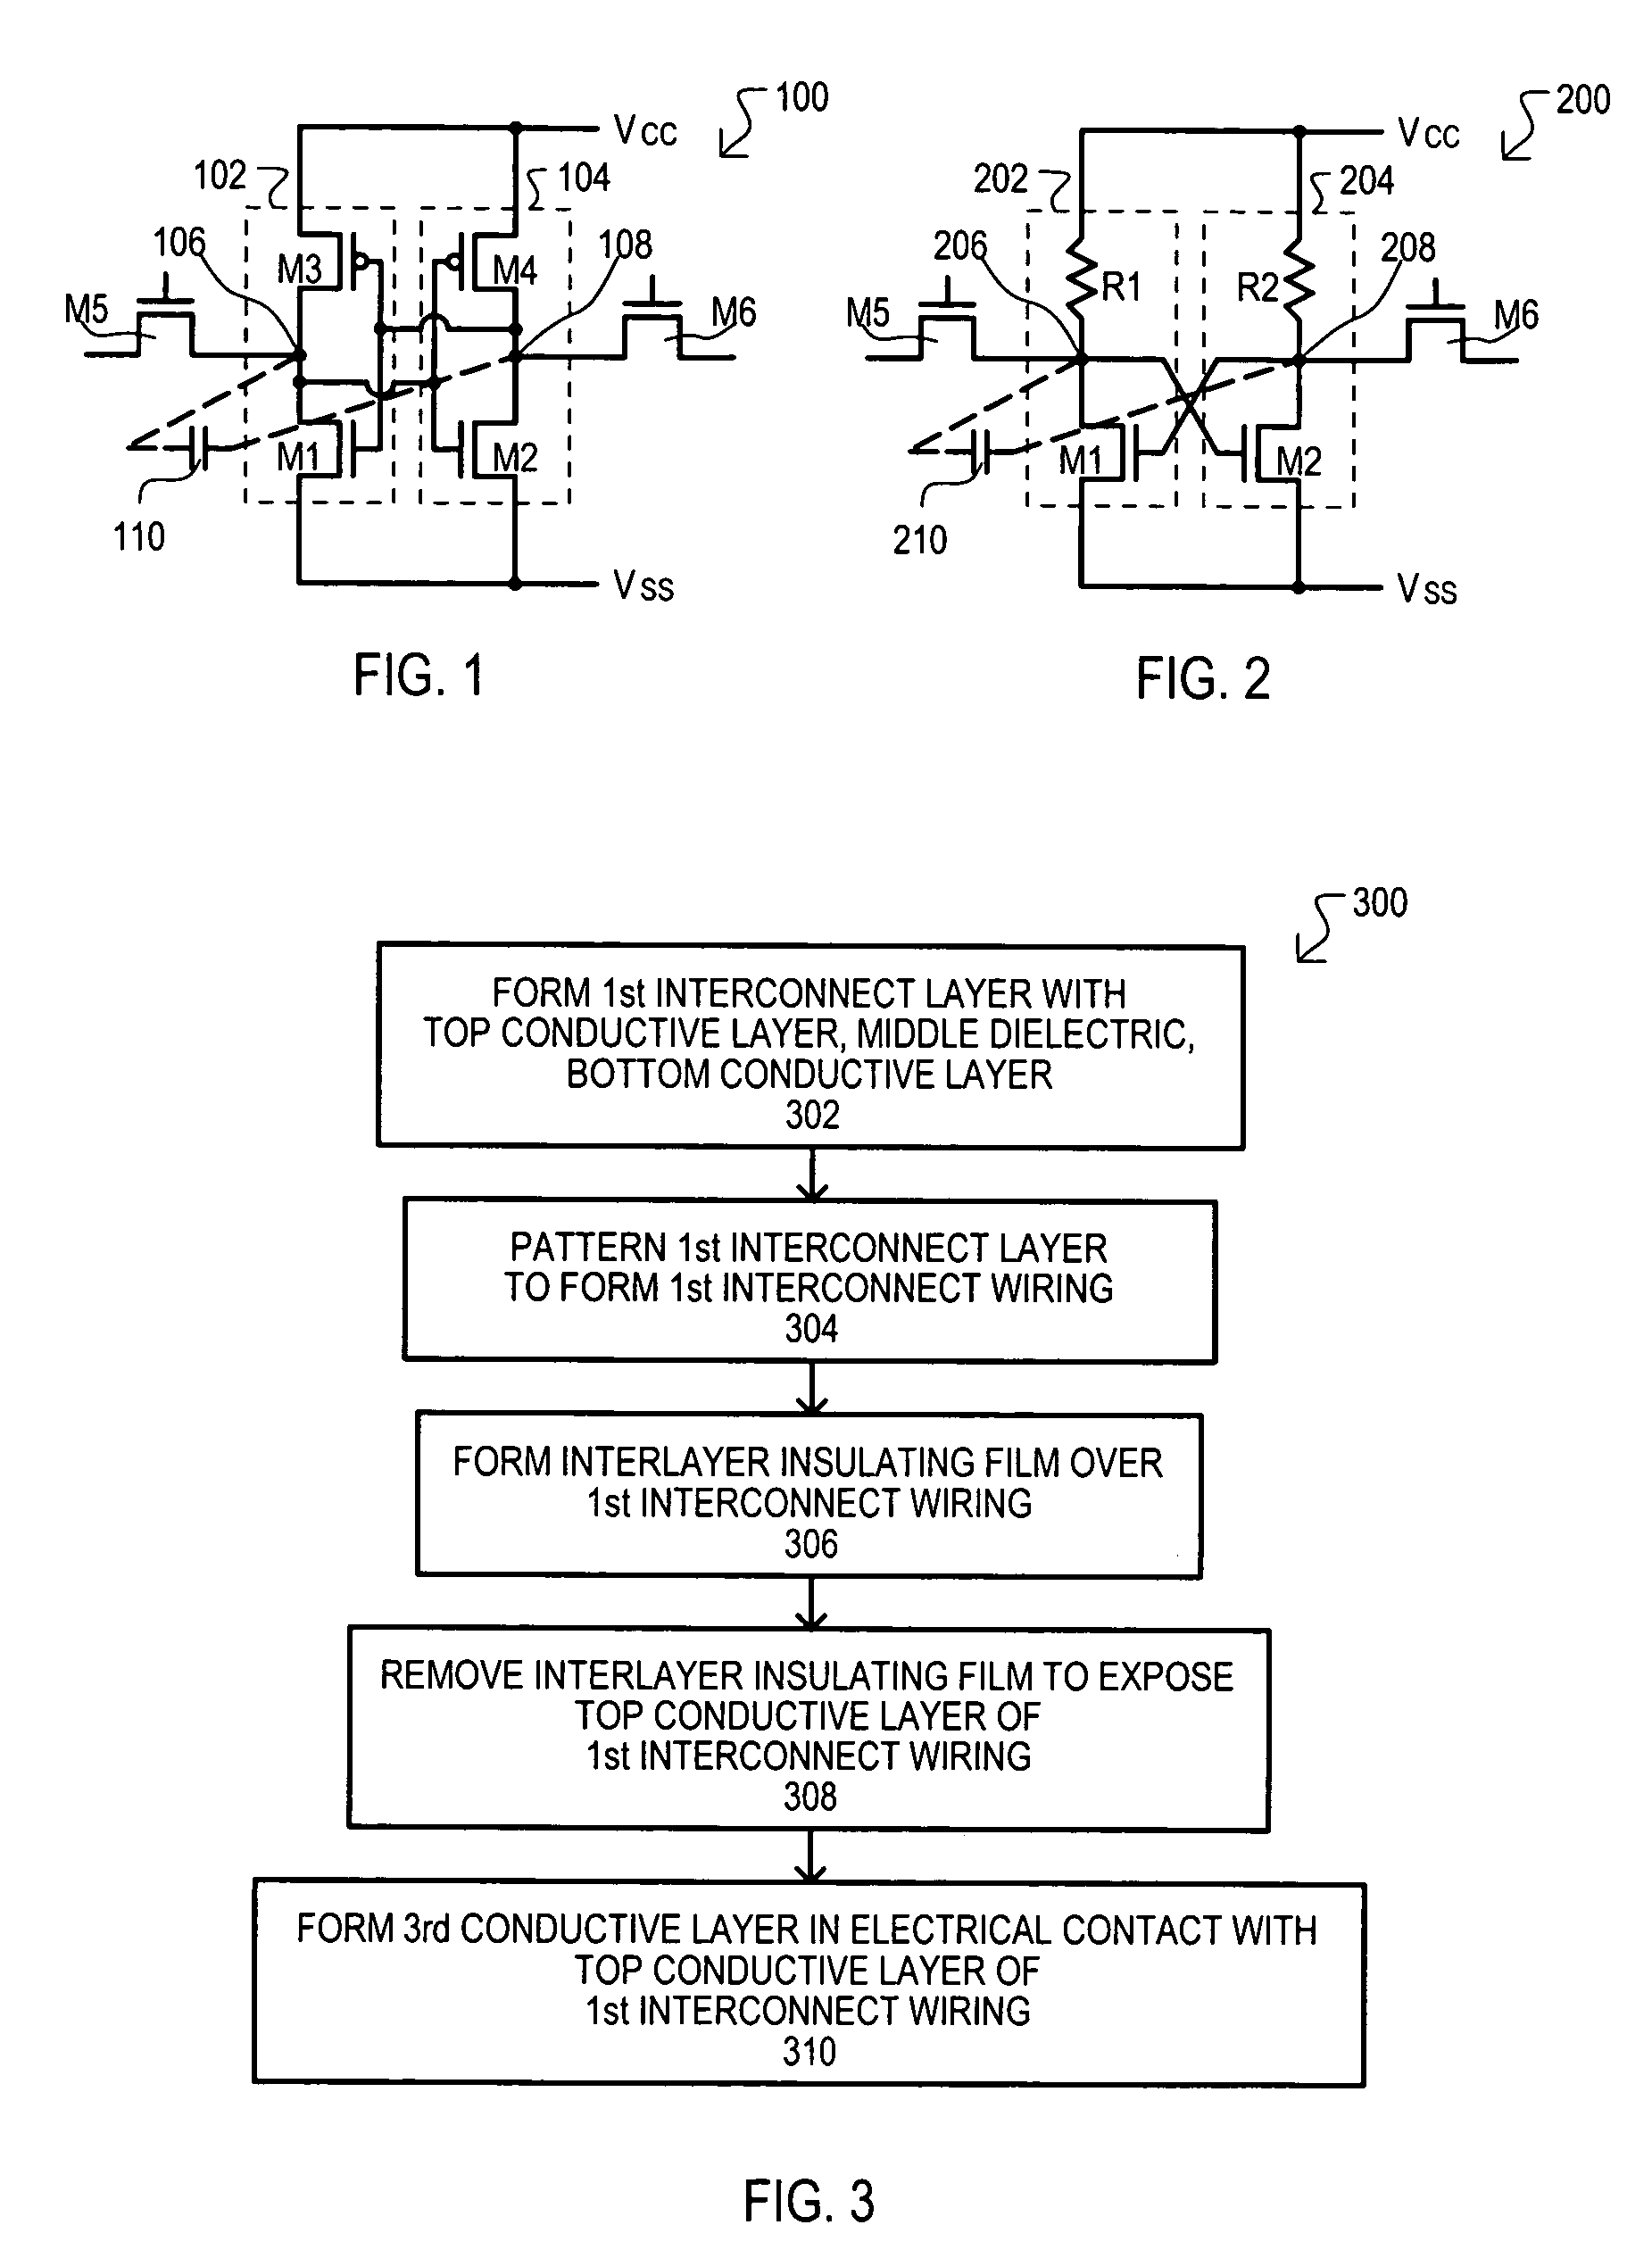 Soft error resistant memory cell and method of manufacture